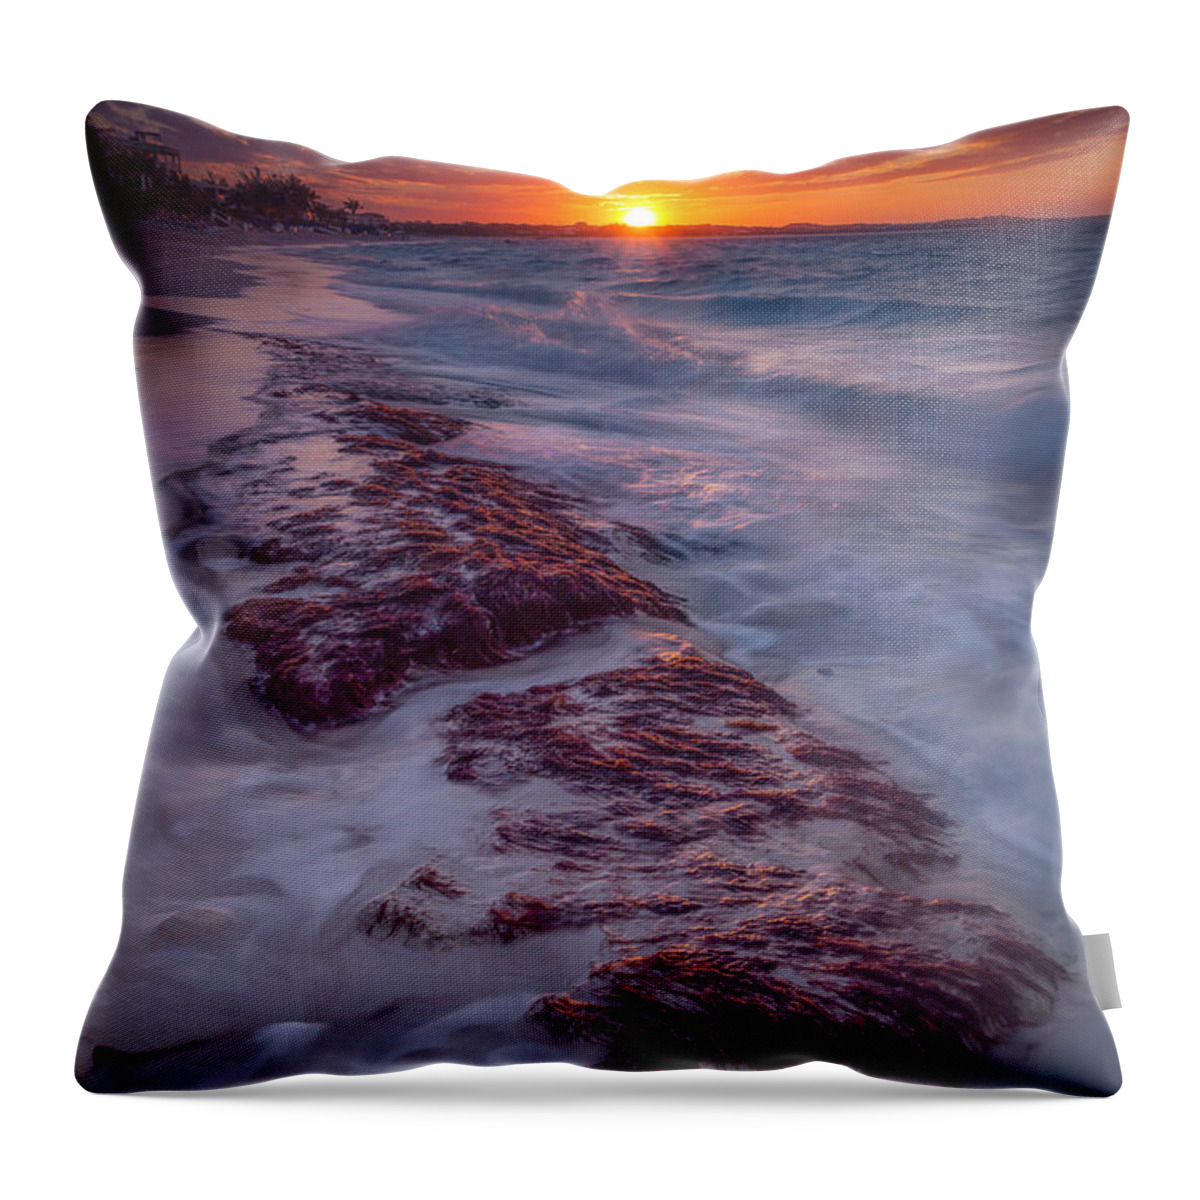 Landscape Throw Pillow featuring the photograph Grace Bay Sunset by Marco Crupi